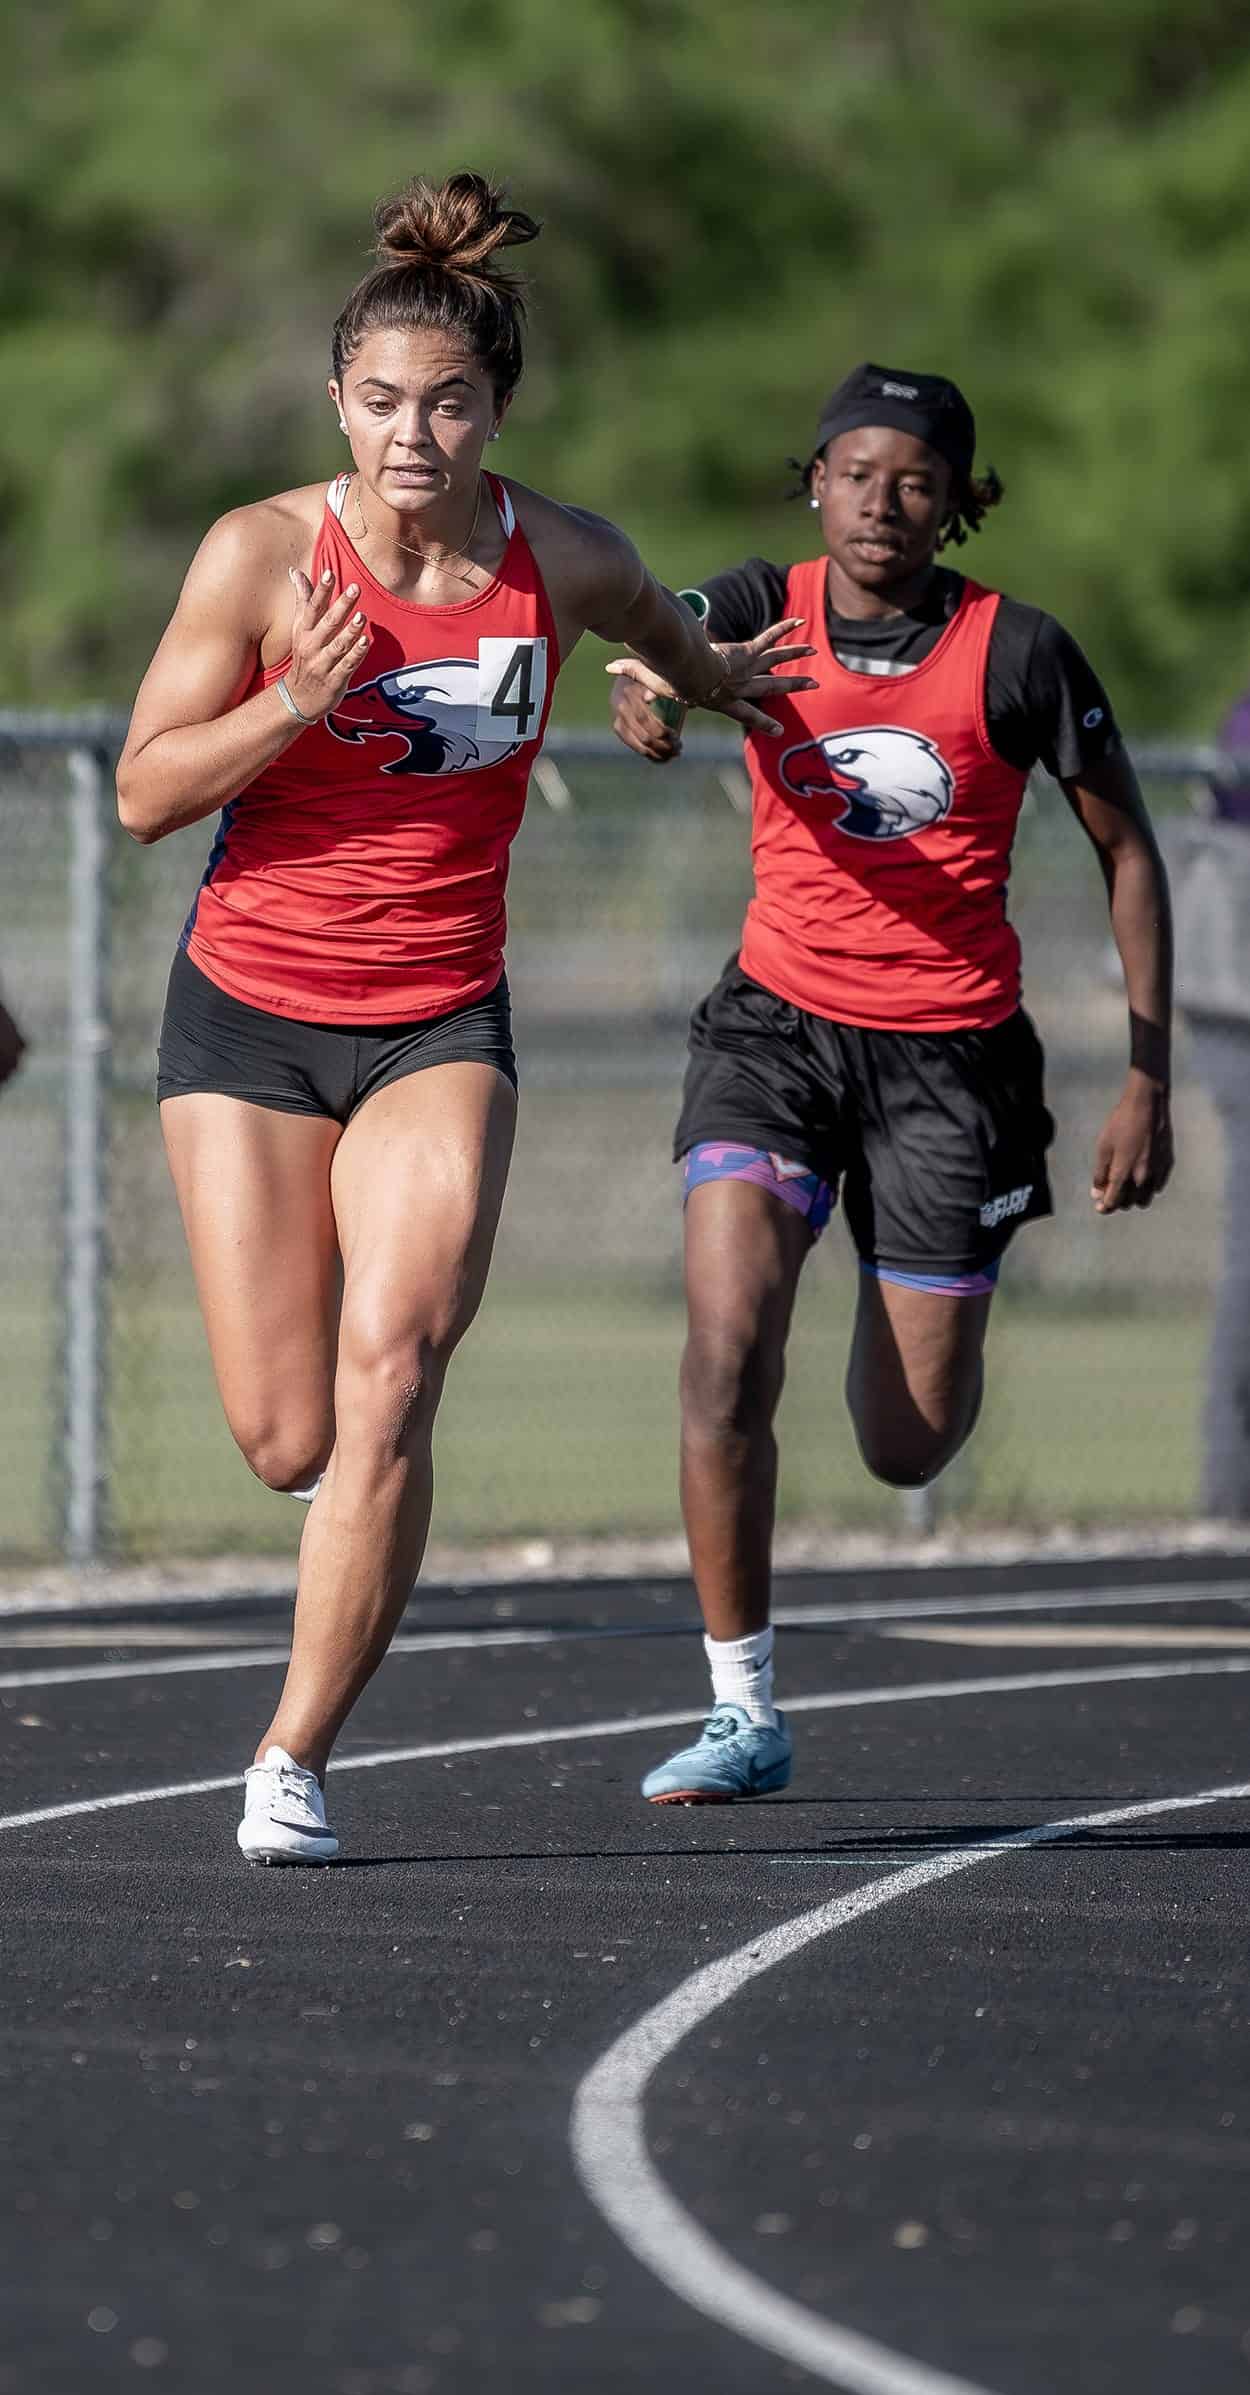 Springstead High’s Ava Kanaar takes the baton from J’Ziyah Munford to anchor the winning 4x100 relay team at the GC8 Track and Field Championships at Weeki Wachee High School. Photo by [Joe DiCristofalo]